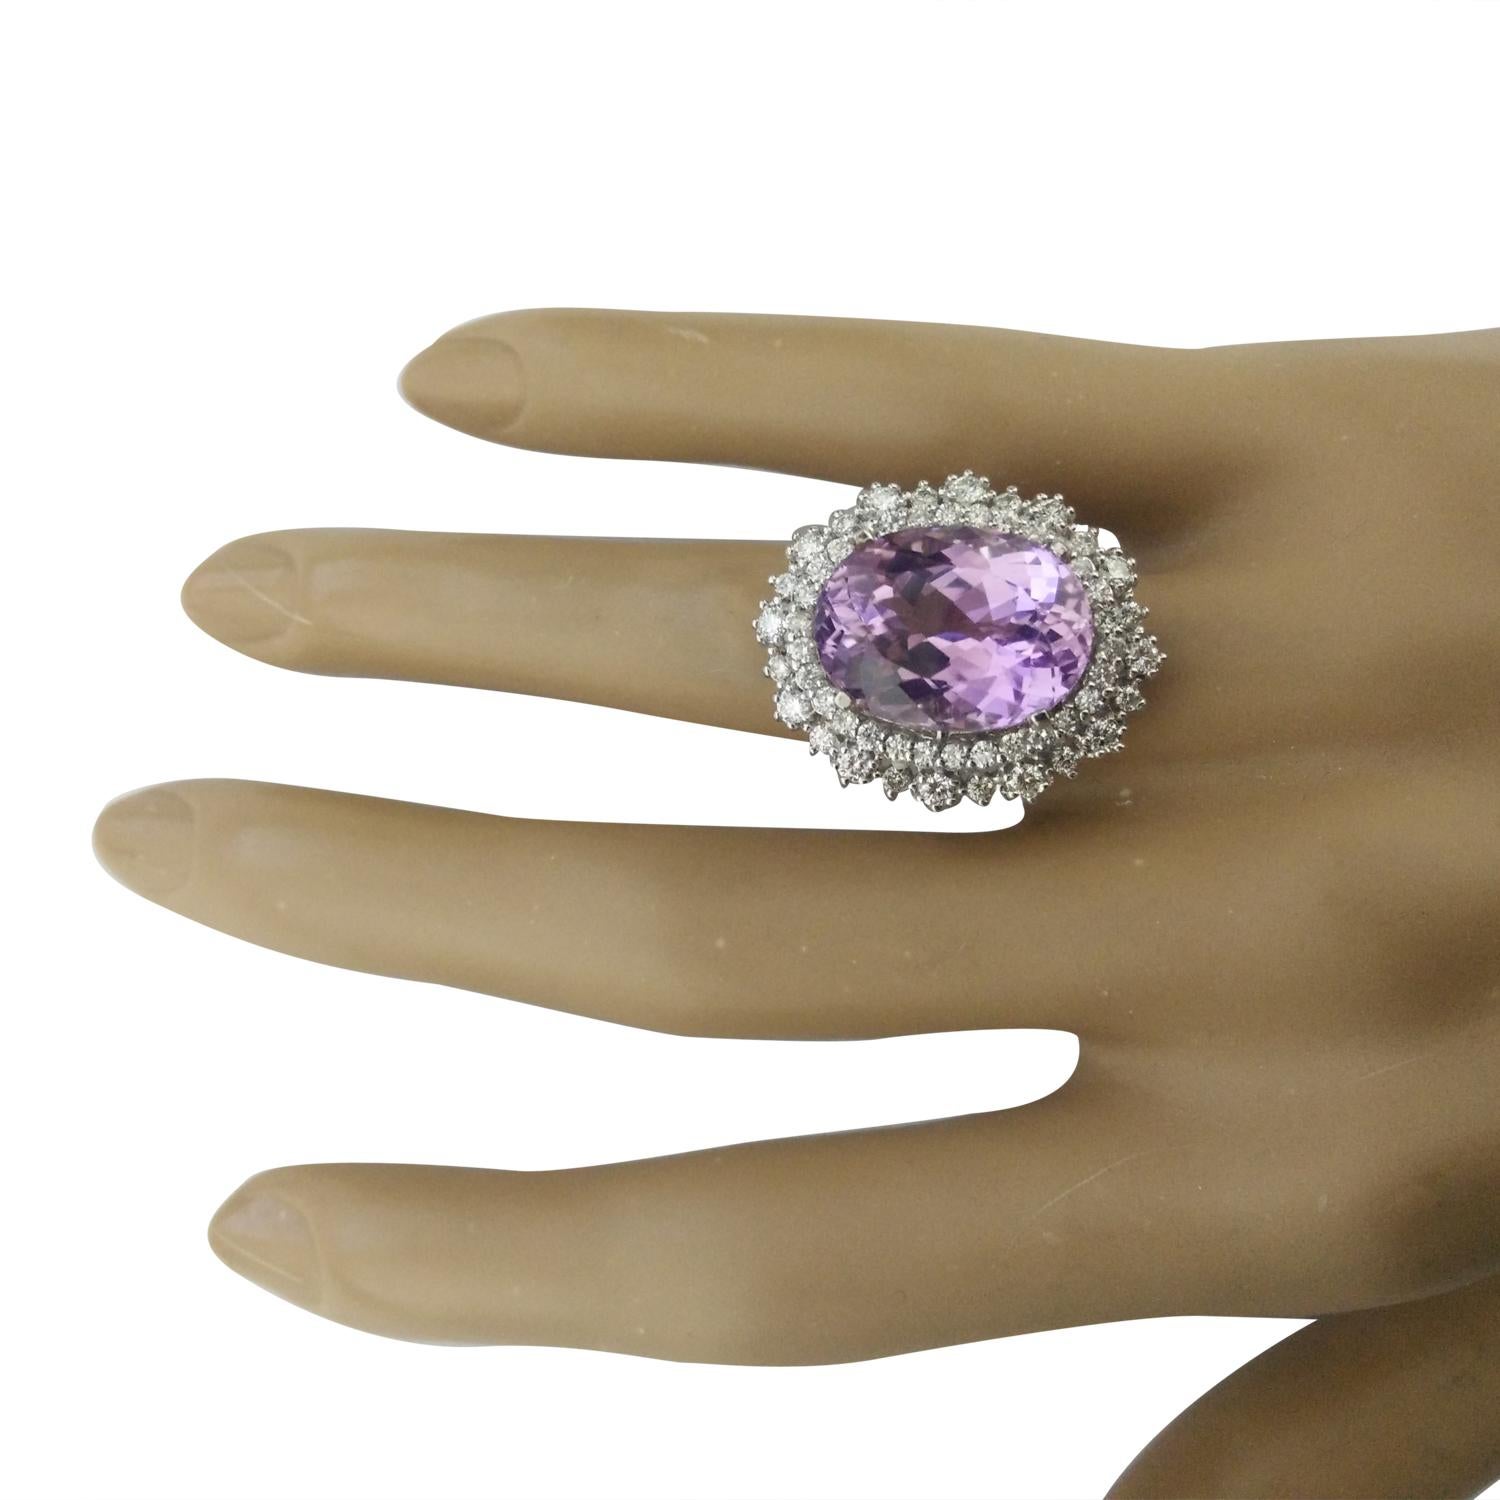 18.58 Carat Natural Kunzite 14 Karat Solid White Gold Diamond Ring
Stamped: 14K 
Ring Size: 7
Total Ring Weight: 9.5 Grams
Kunzite Weight: 16.88 Carat (17.00x13.80 Millimeter)
Quantity: 56
Diamond Weight: 1.70 Carat (F-G Color, VS2-SI1 Clarity
Face